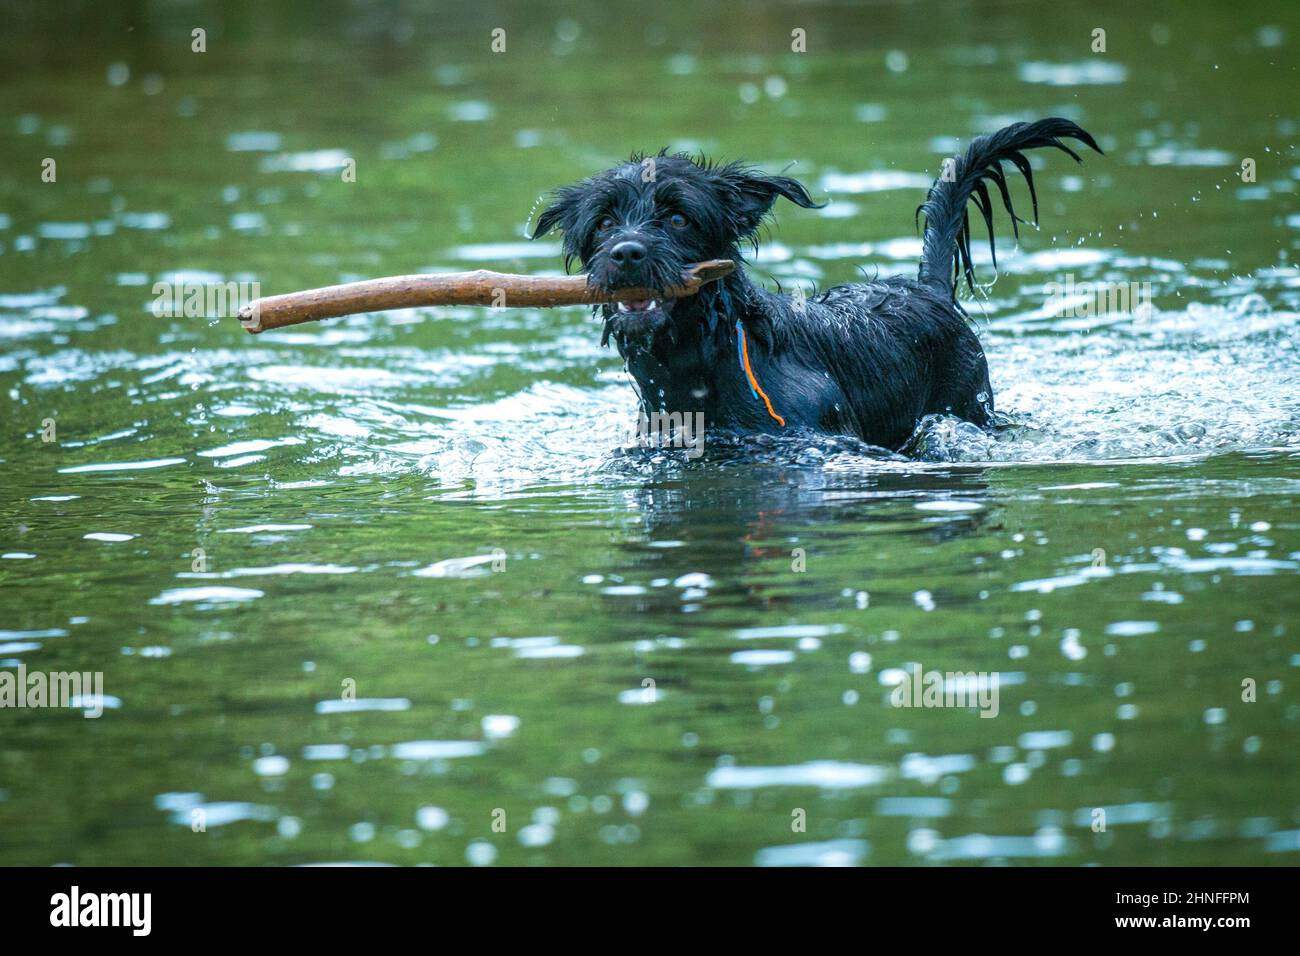 Black dog with cane swimming in the river. Stock Photo